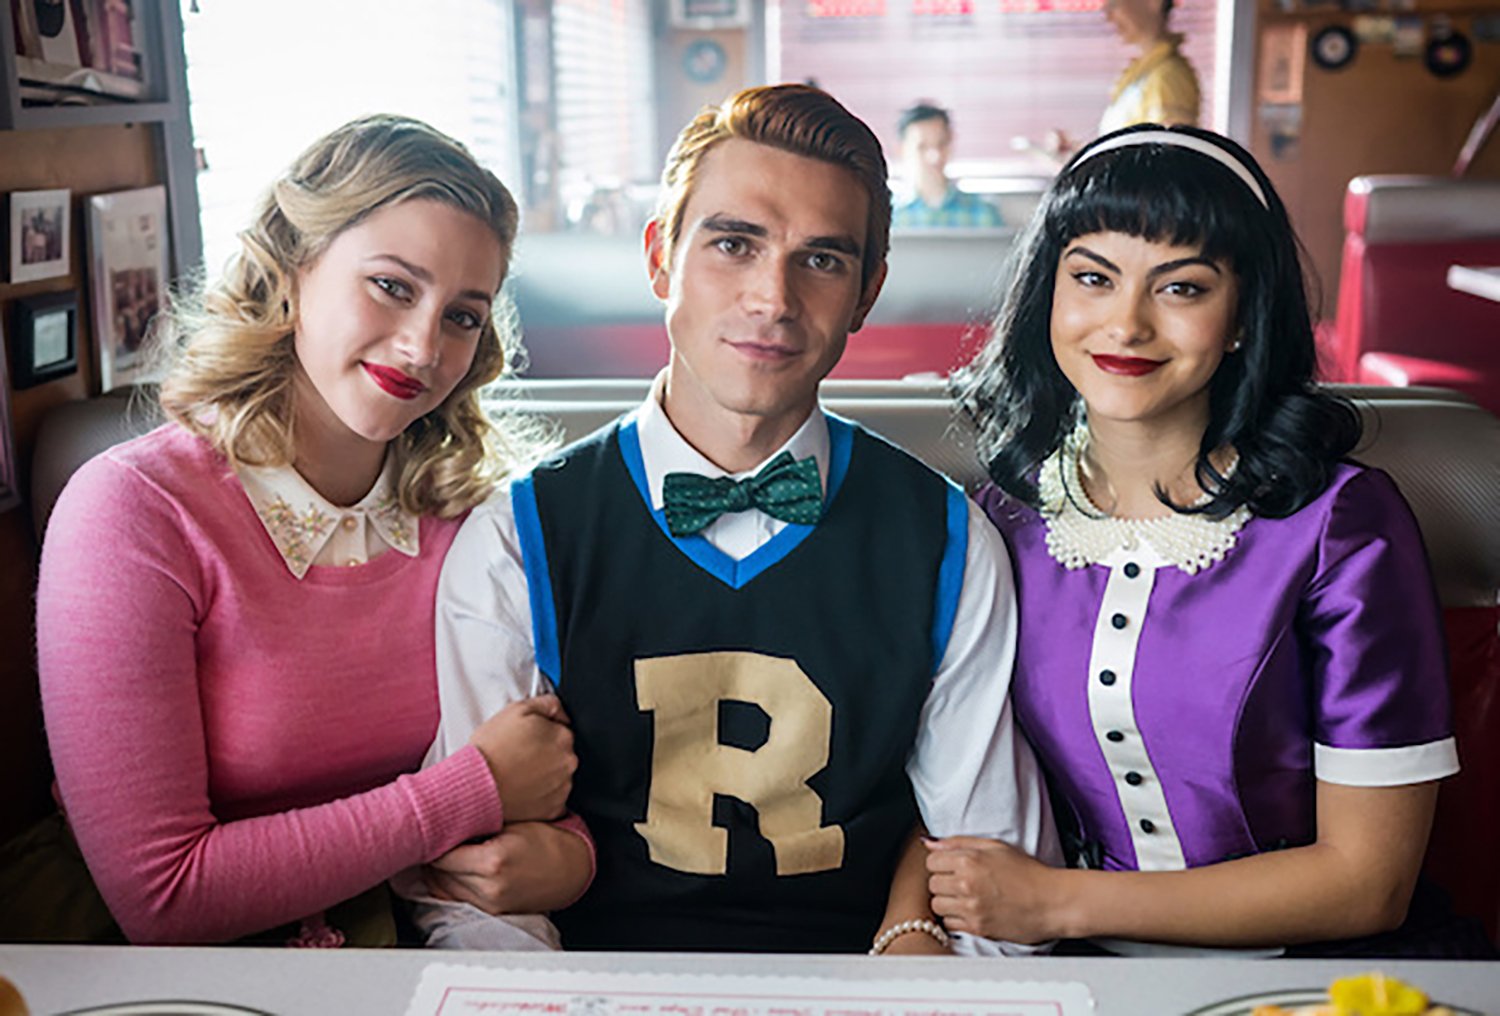 Lili Reinhart as Betty, KJ Apa as Archie, and Camila Mendes as Veronica in Riverdale Season 6 Episode 5.